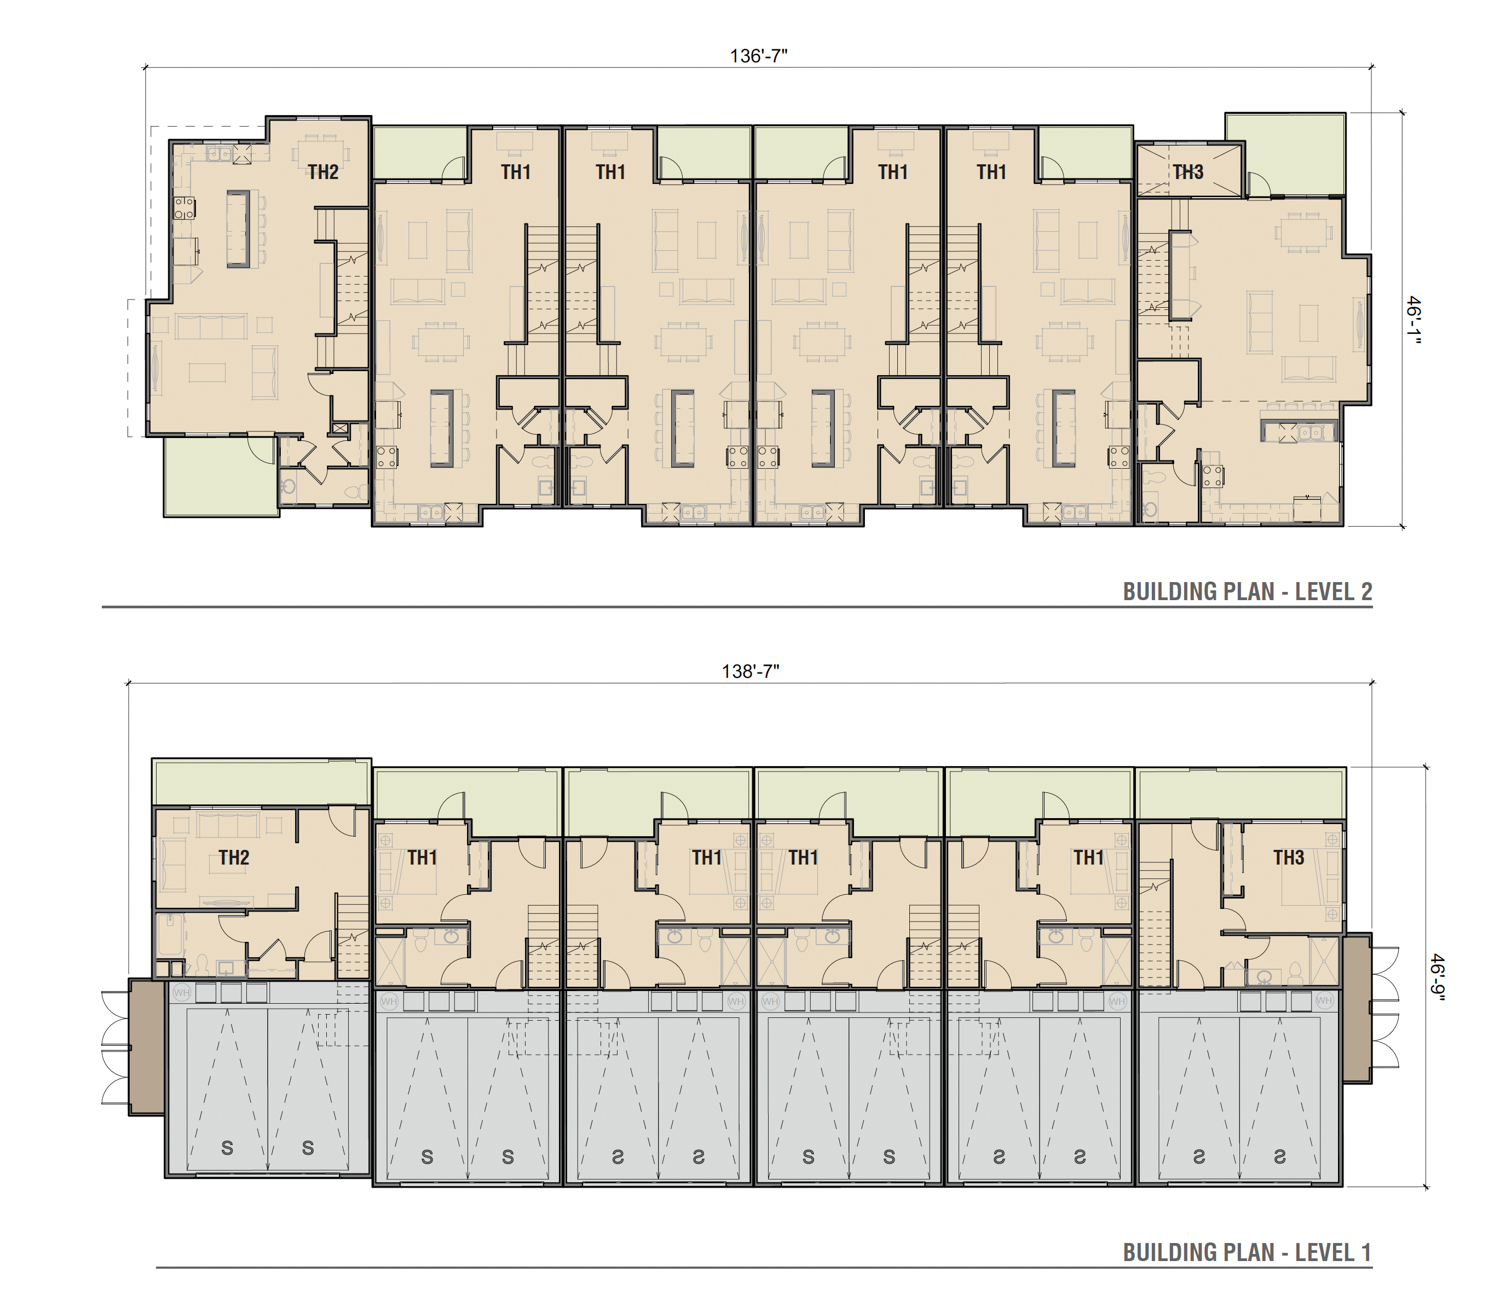 1801 21st Street townhomes floor plans for levels one and two, illustration by TCA Architects